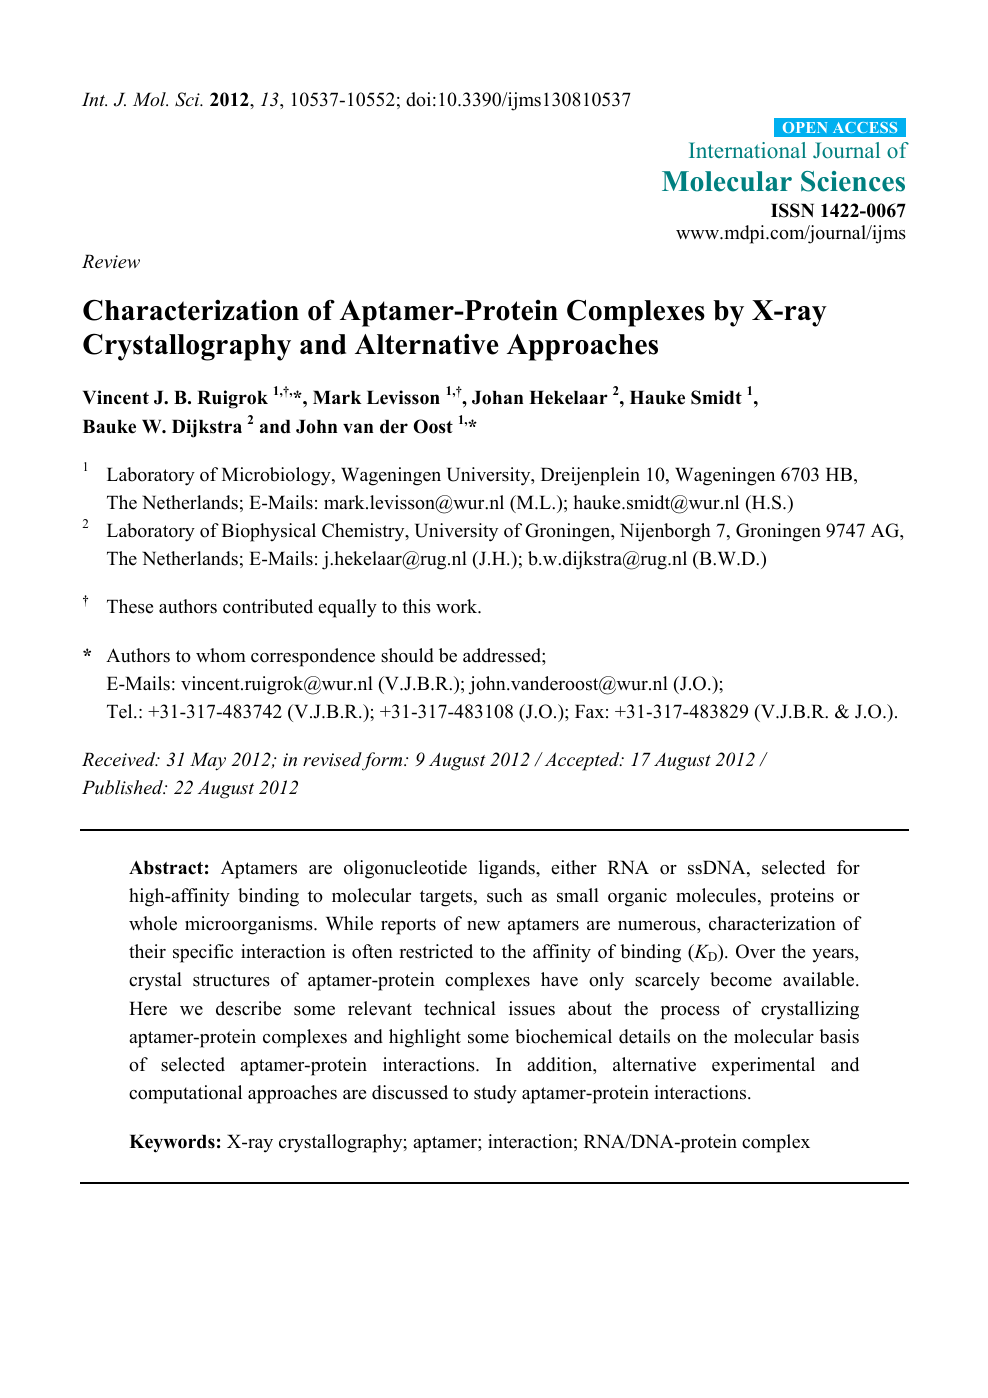 Characterization Of Aptamer Protein Complexes By X Ray Crystallography And Alternative Approaches Topic Of Research Paper In Biological Sciences Download Scholarly Article Pdf And Read For Free On Cyberleninka Open Science Hub